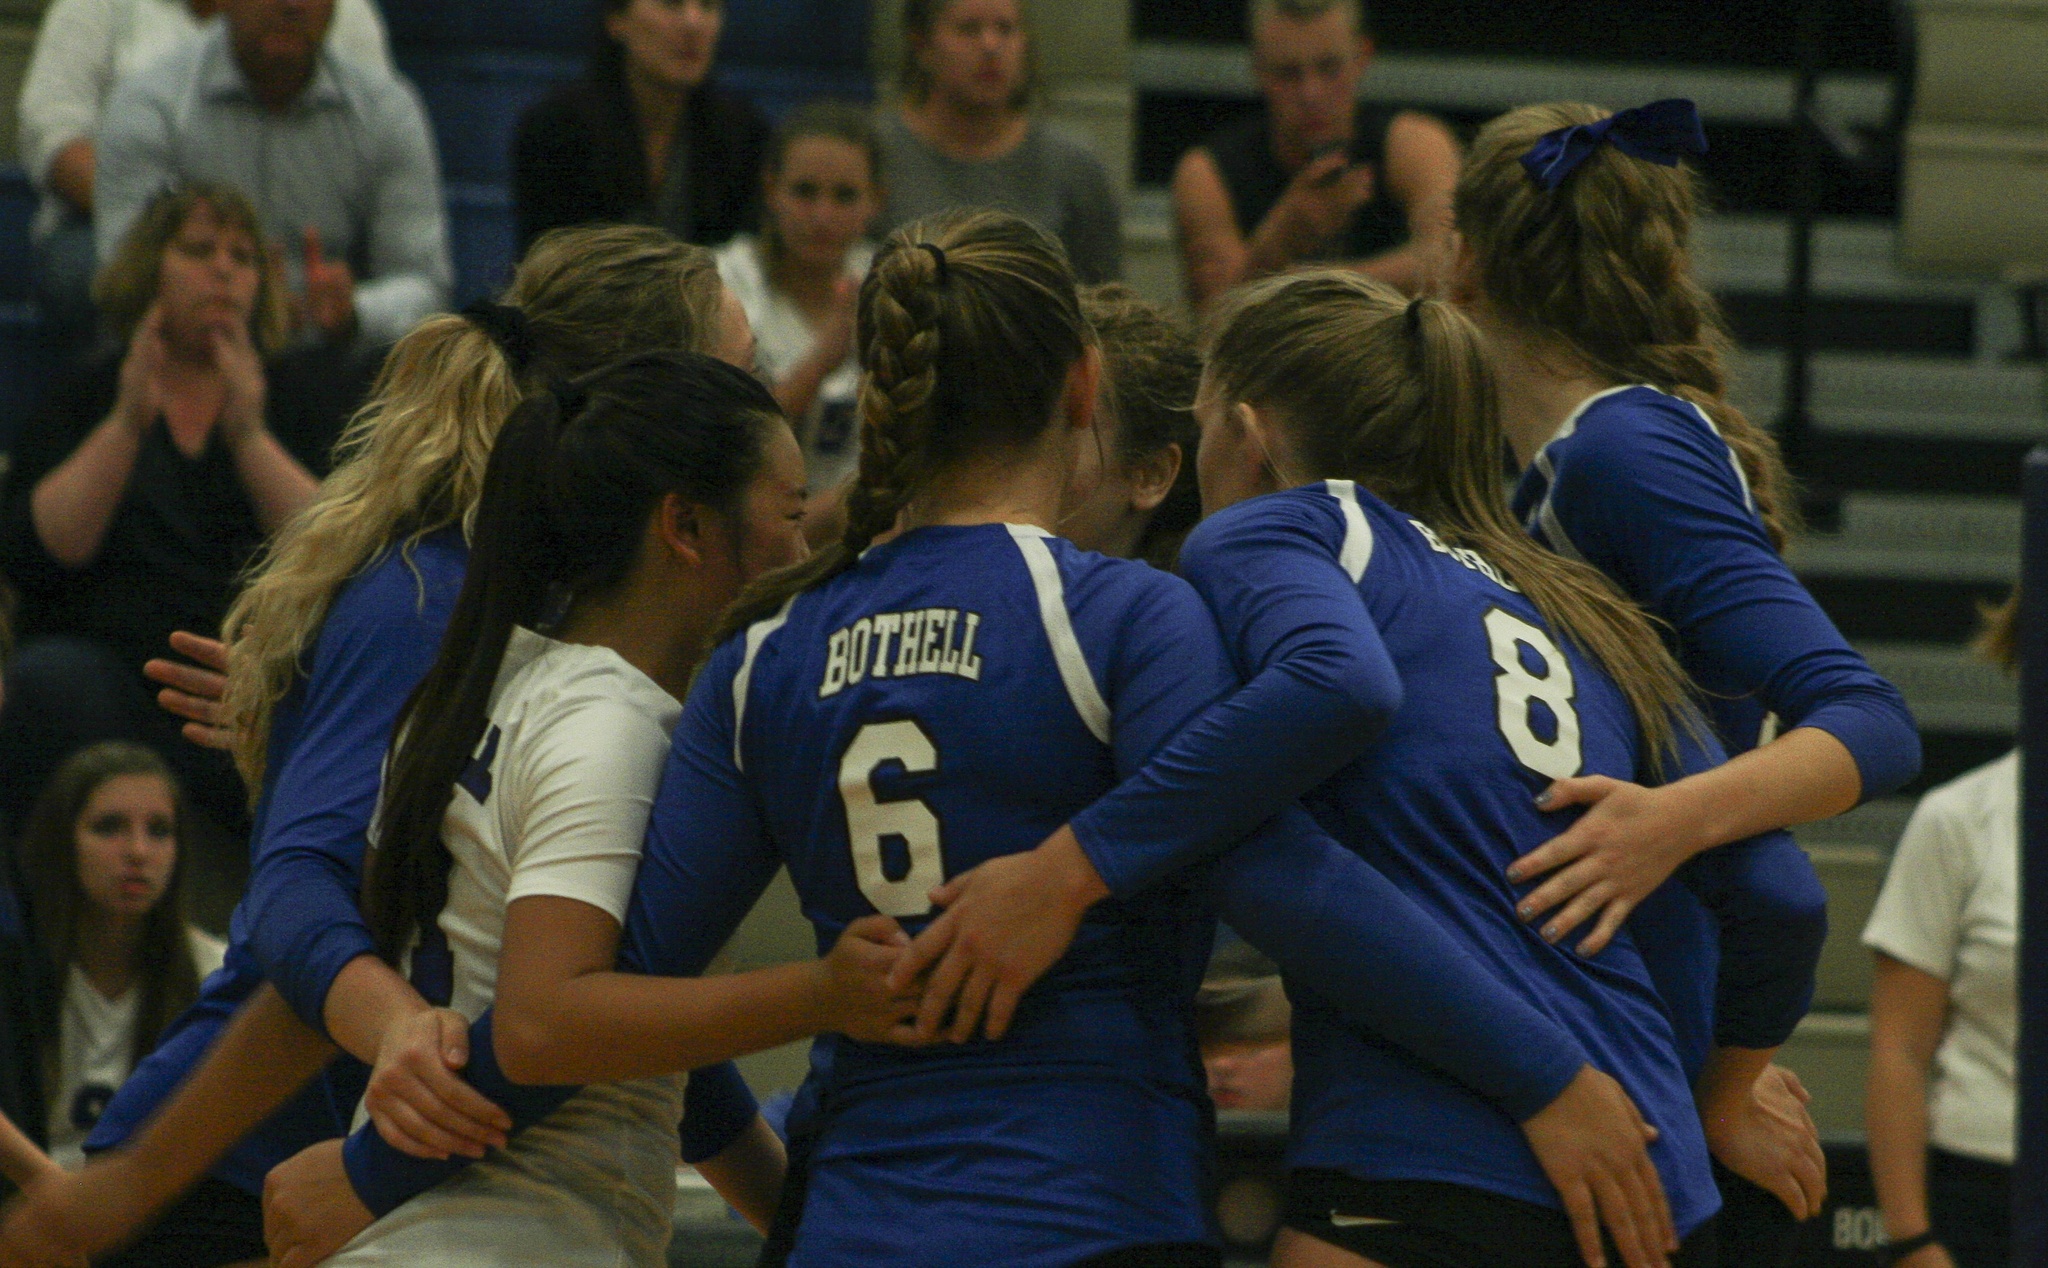 The Bothell High volleyball team pauses during a break in the action on Thursday